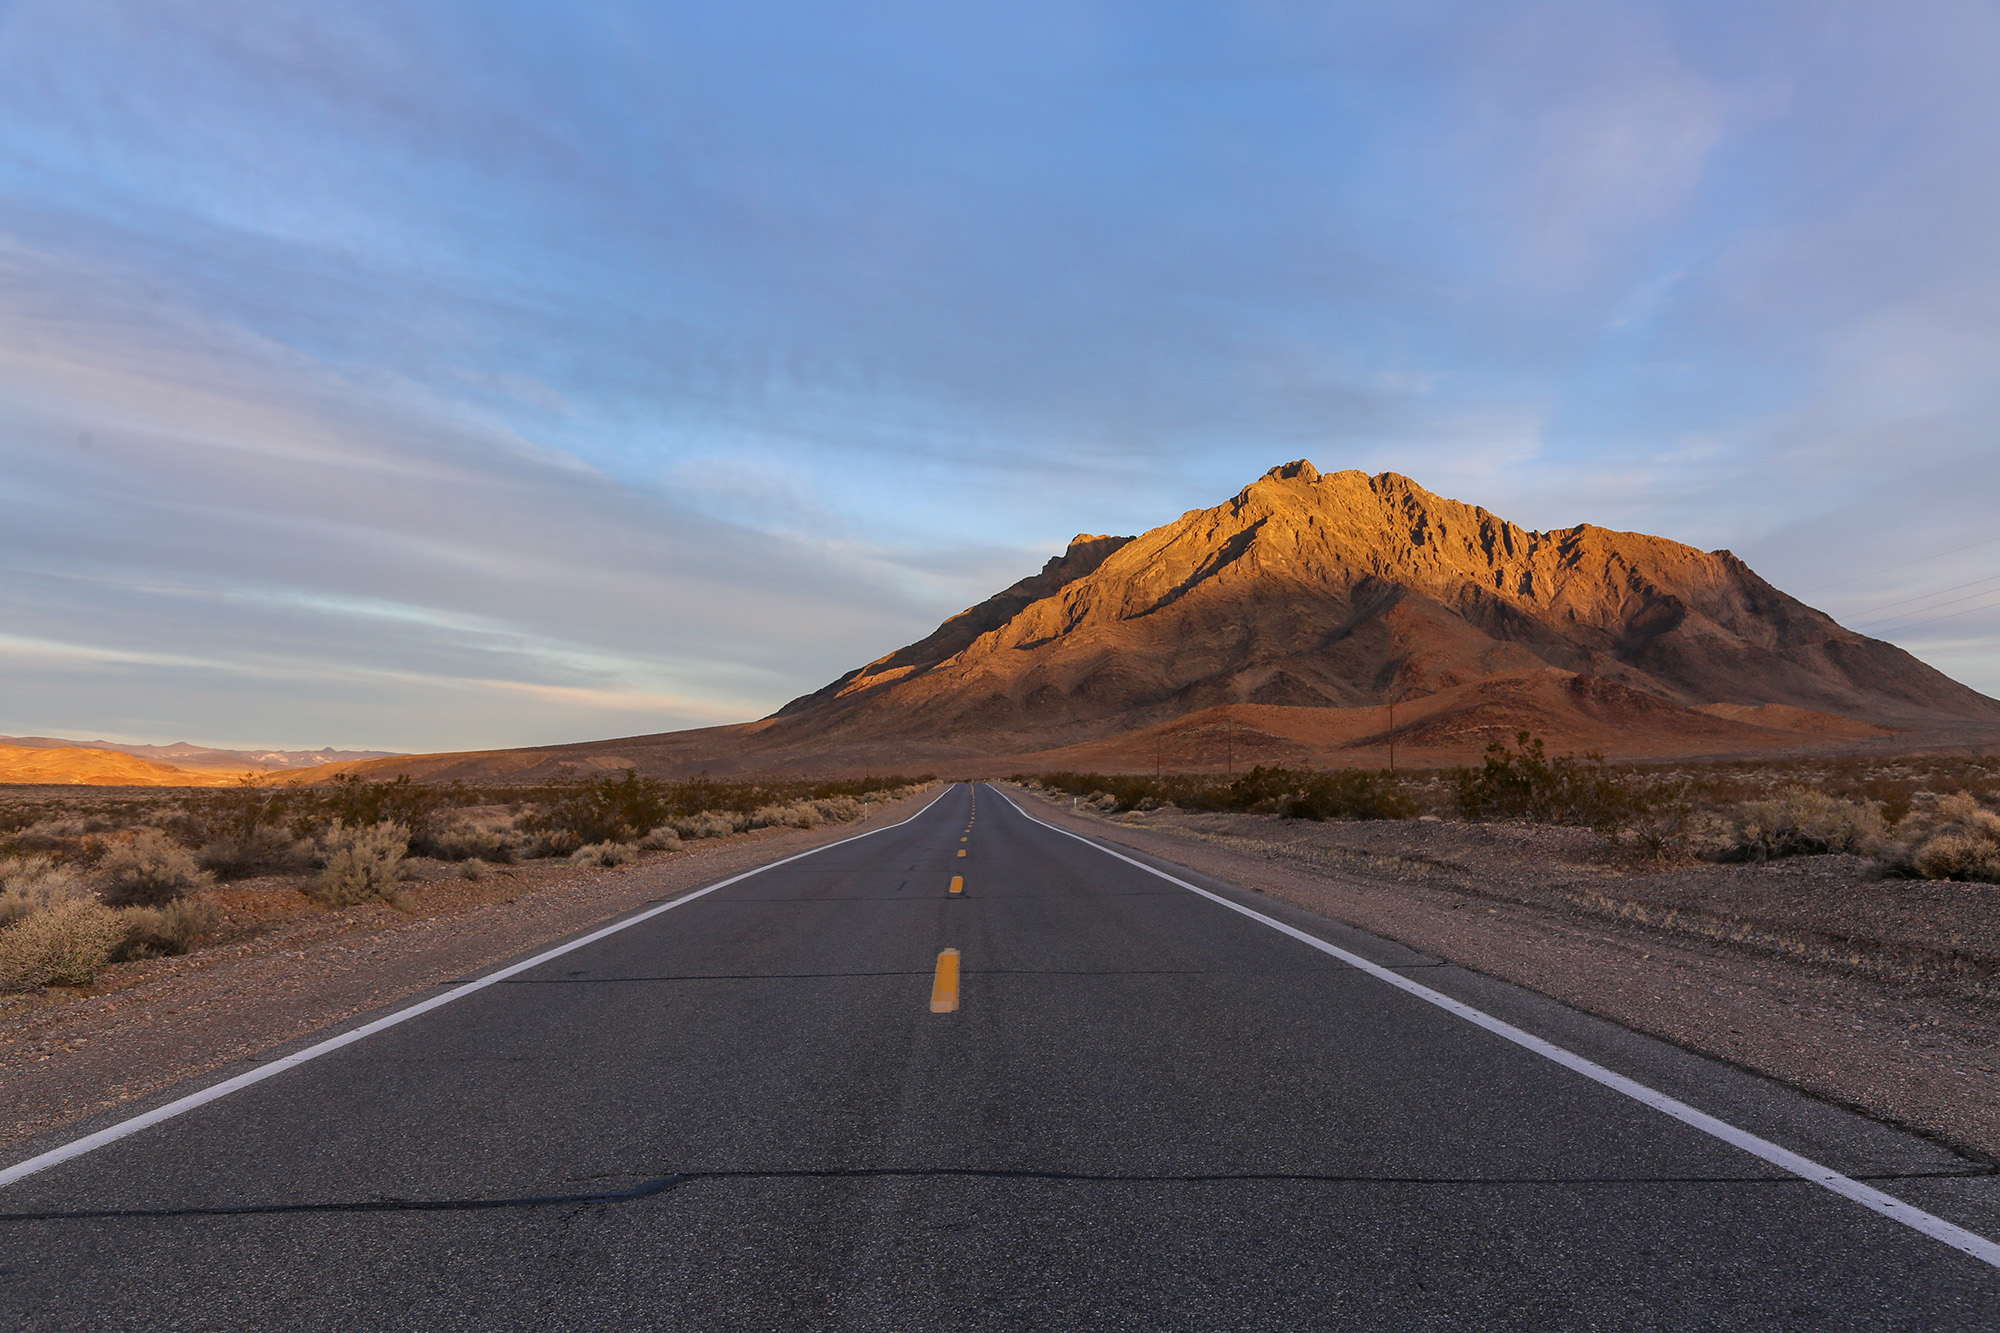 A two lane paved road at sunset near Death Valley Junction in Death Valley National Park, California.